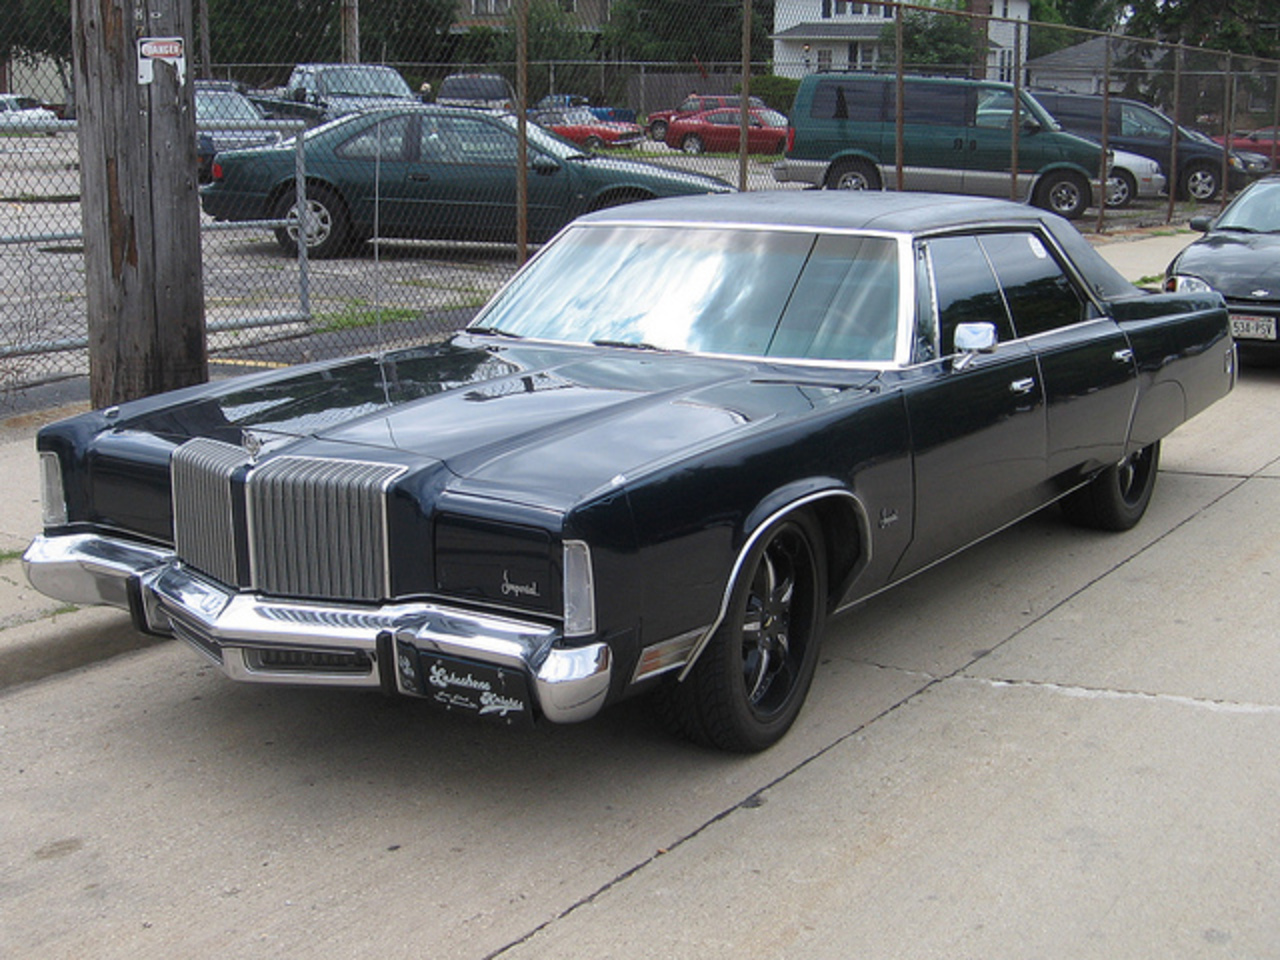 1975 Imperial Le Baron | Flickr - Photo Sharing!